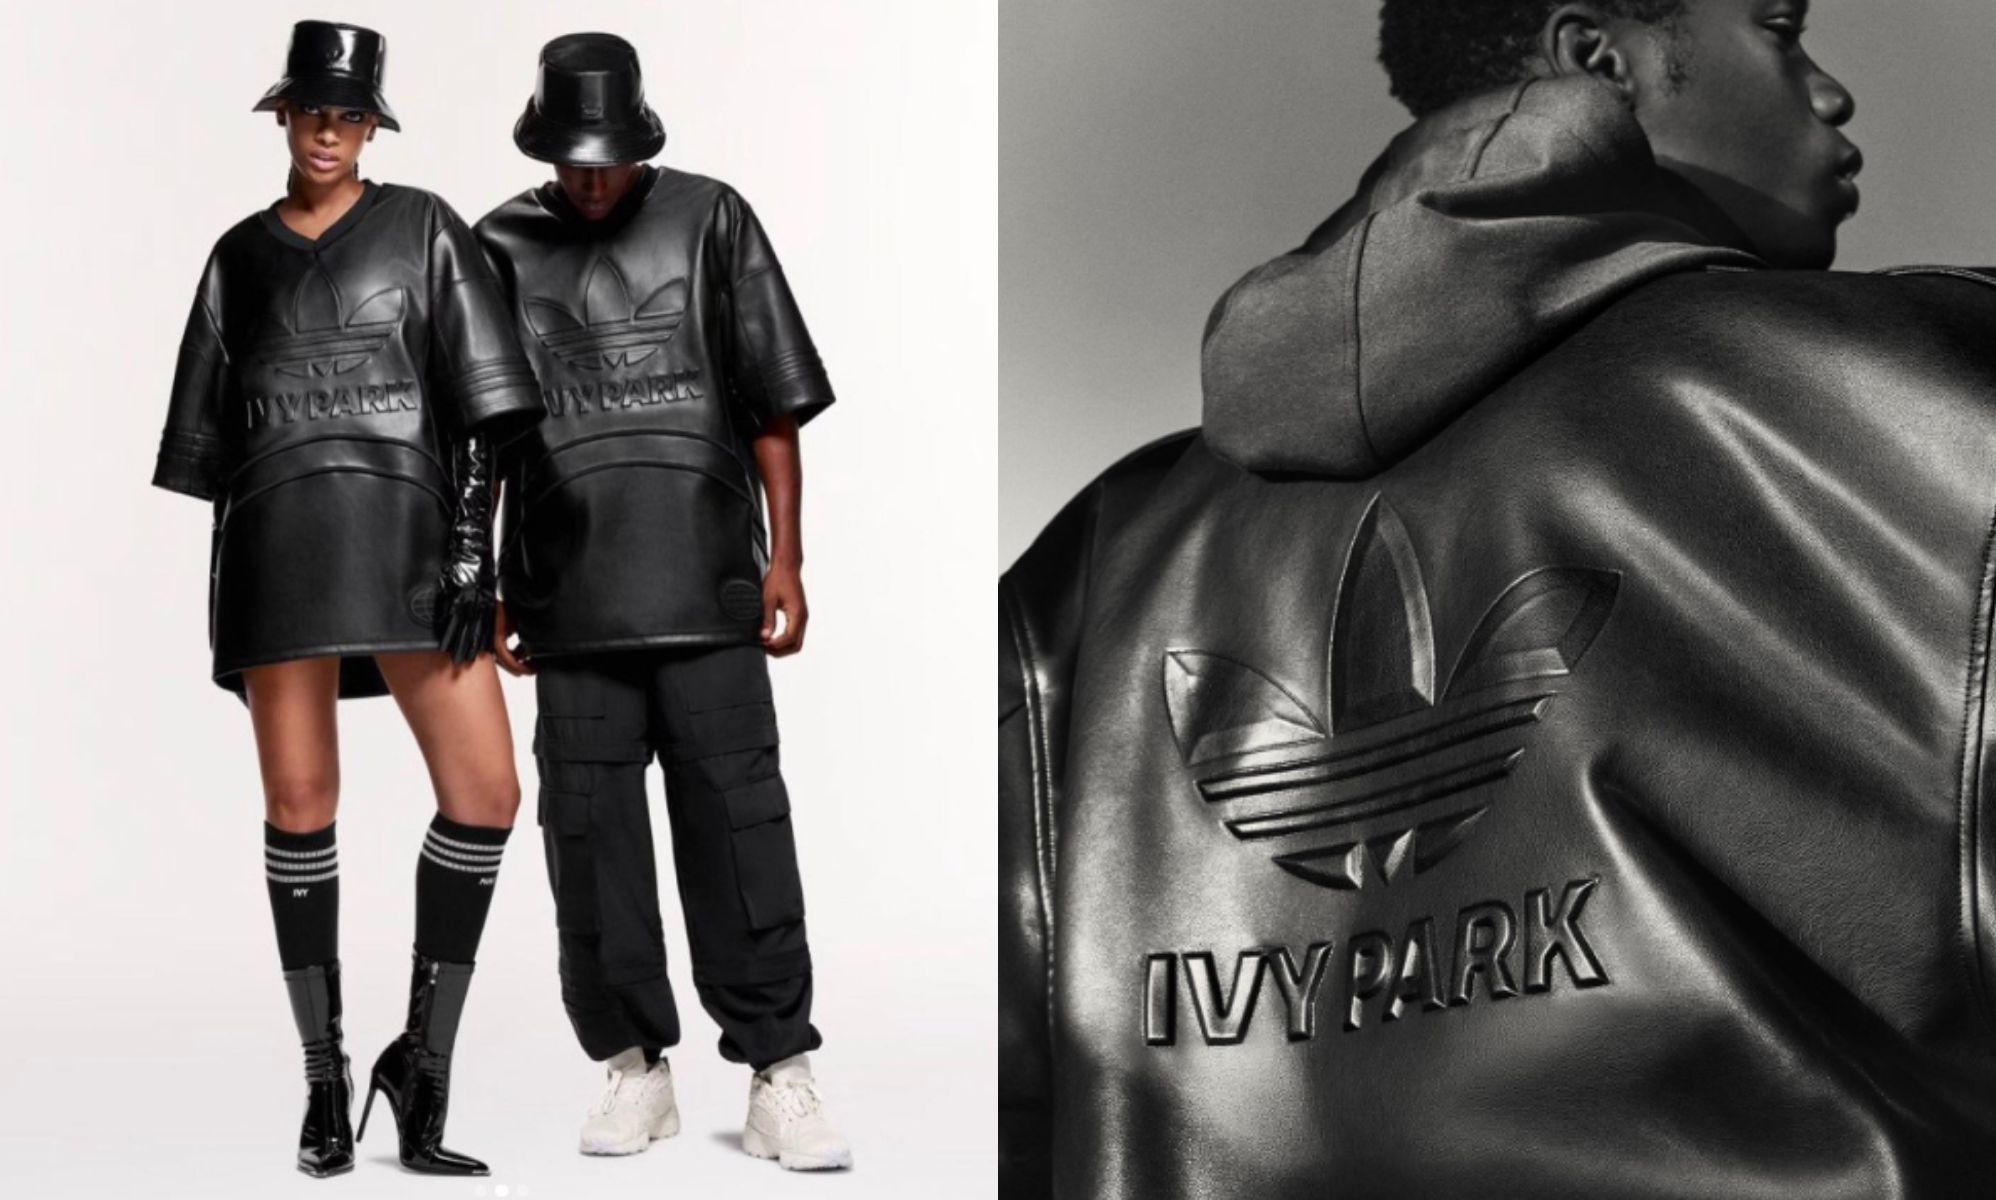 Beyoncé's final IVY PARK x adidas collection is dropping this week, simply  dubbed 'IVY PARK NOIR'. 📱Full look and release detai